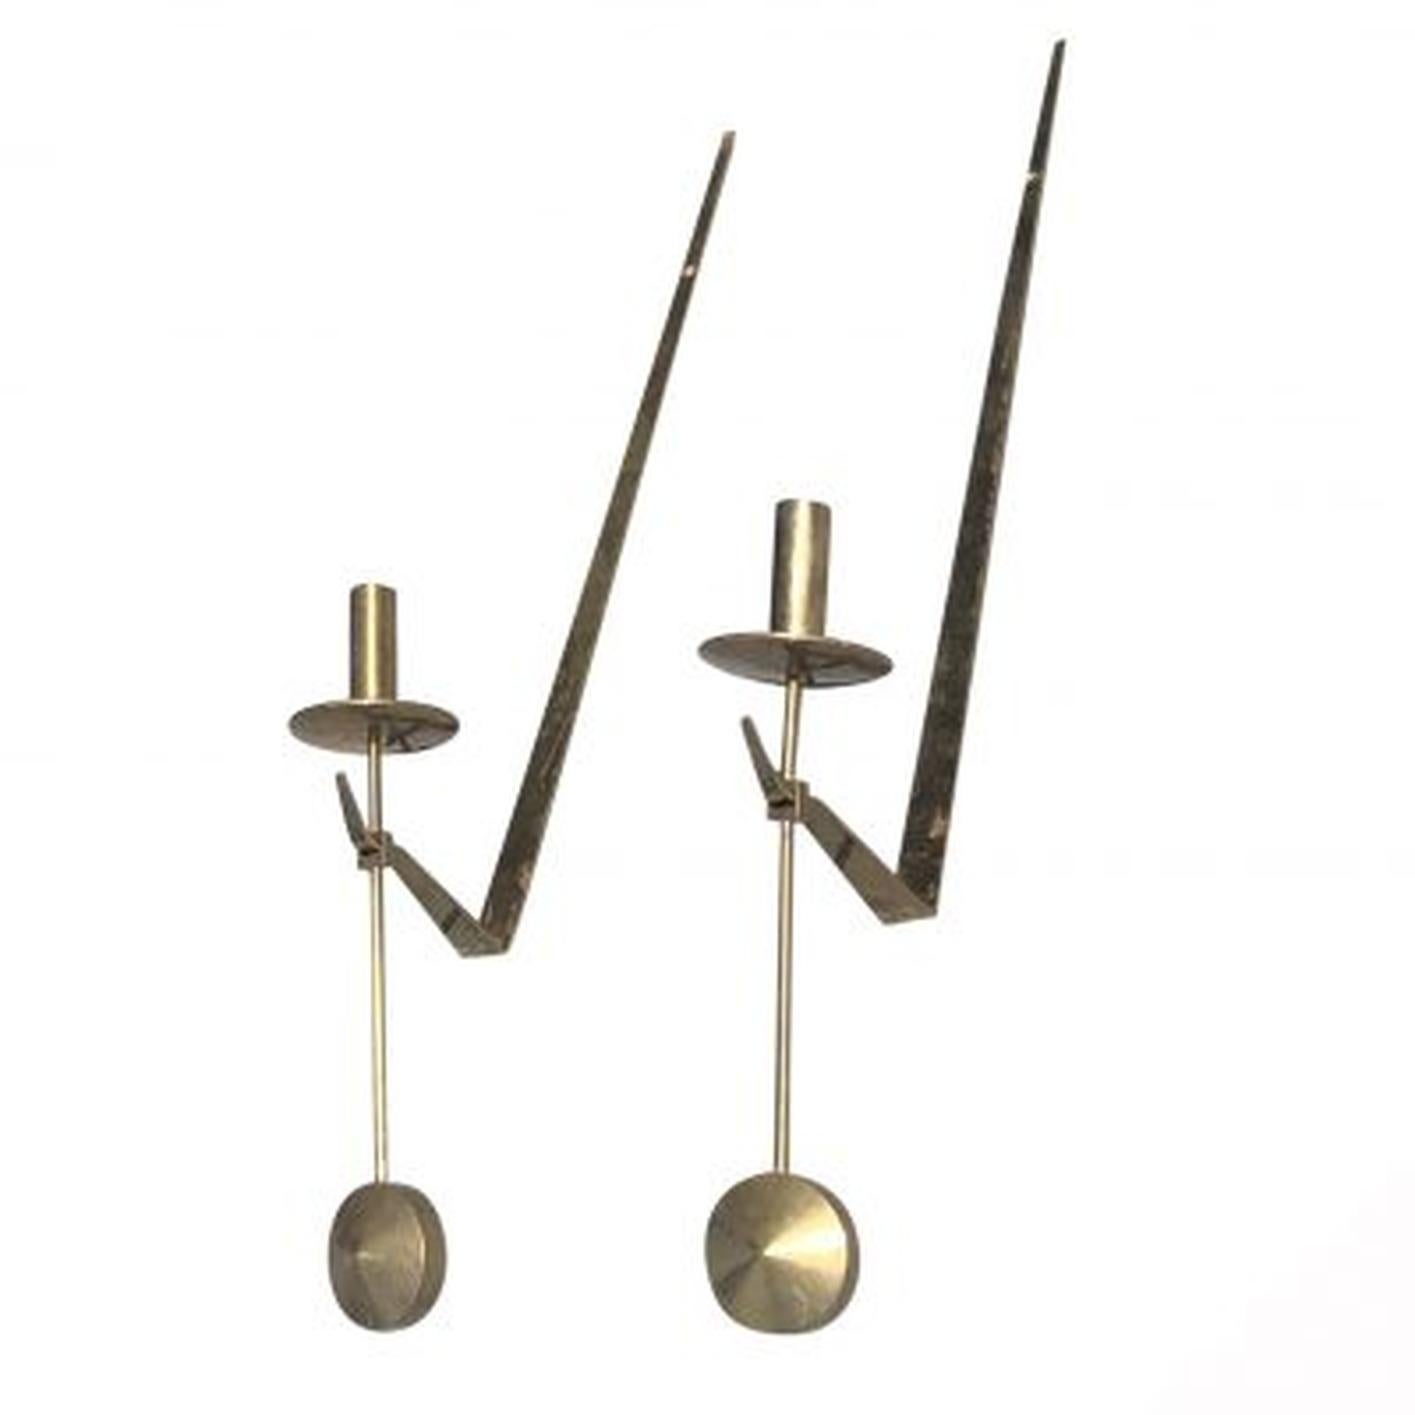 A wall-mounted pair of candleholders made out of brass by Pierre Forsell for Skultuna. Wear consistent with age and use, circa 1950-1960, Sweden Scandinavia.

Pierre Forsell was a Swedish silversmith and designer born in 1925 Stockholm, Sweden and